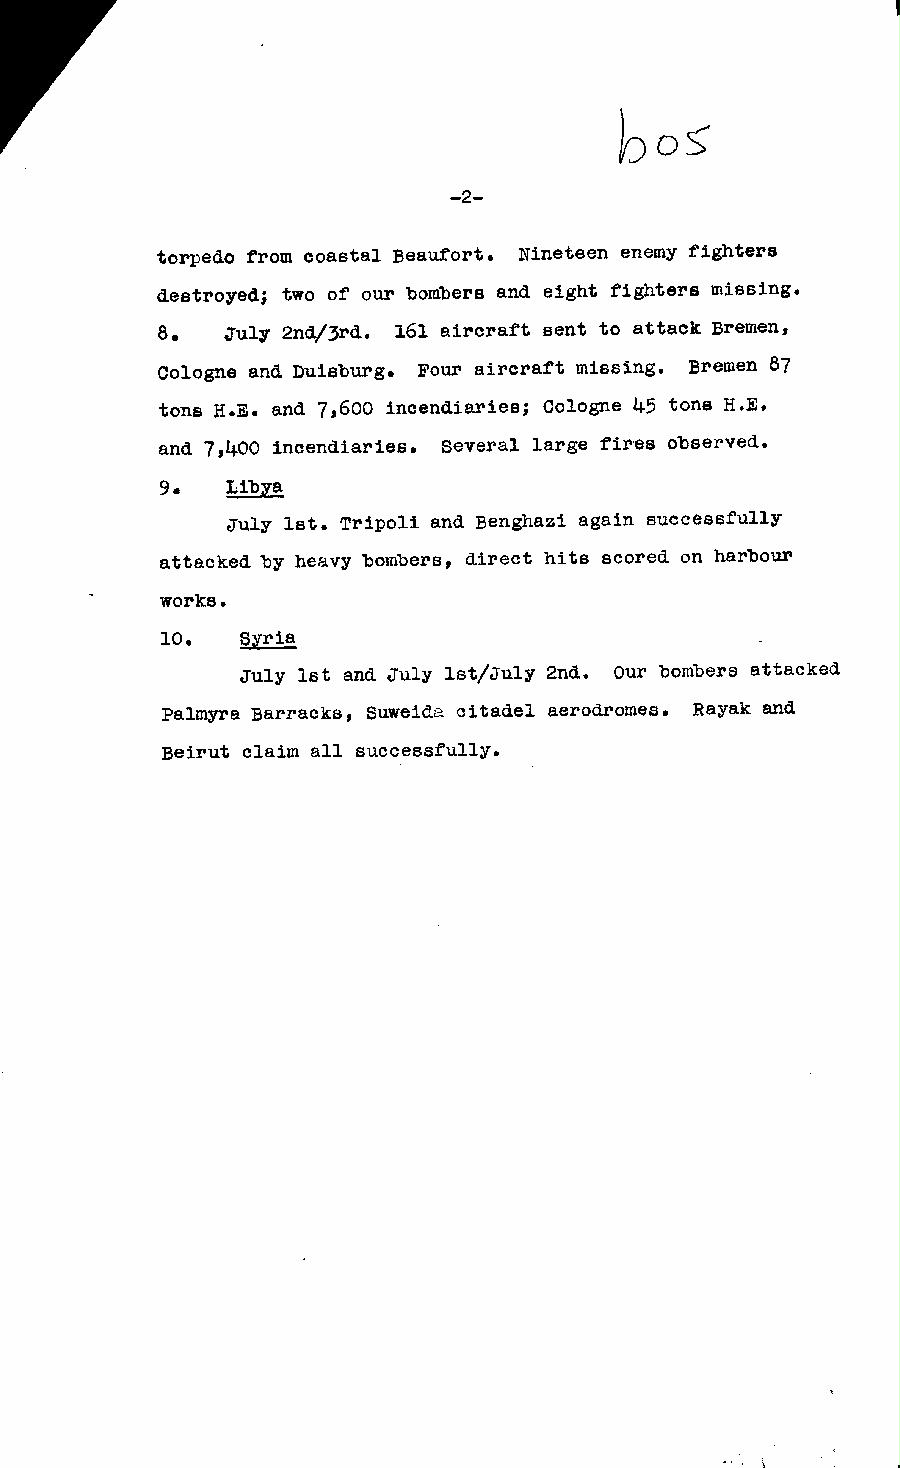 [a322b05.jpg] - Cont-Report on military situation 7/3/41